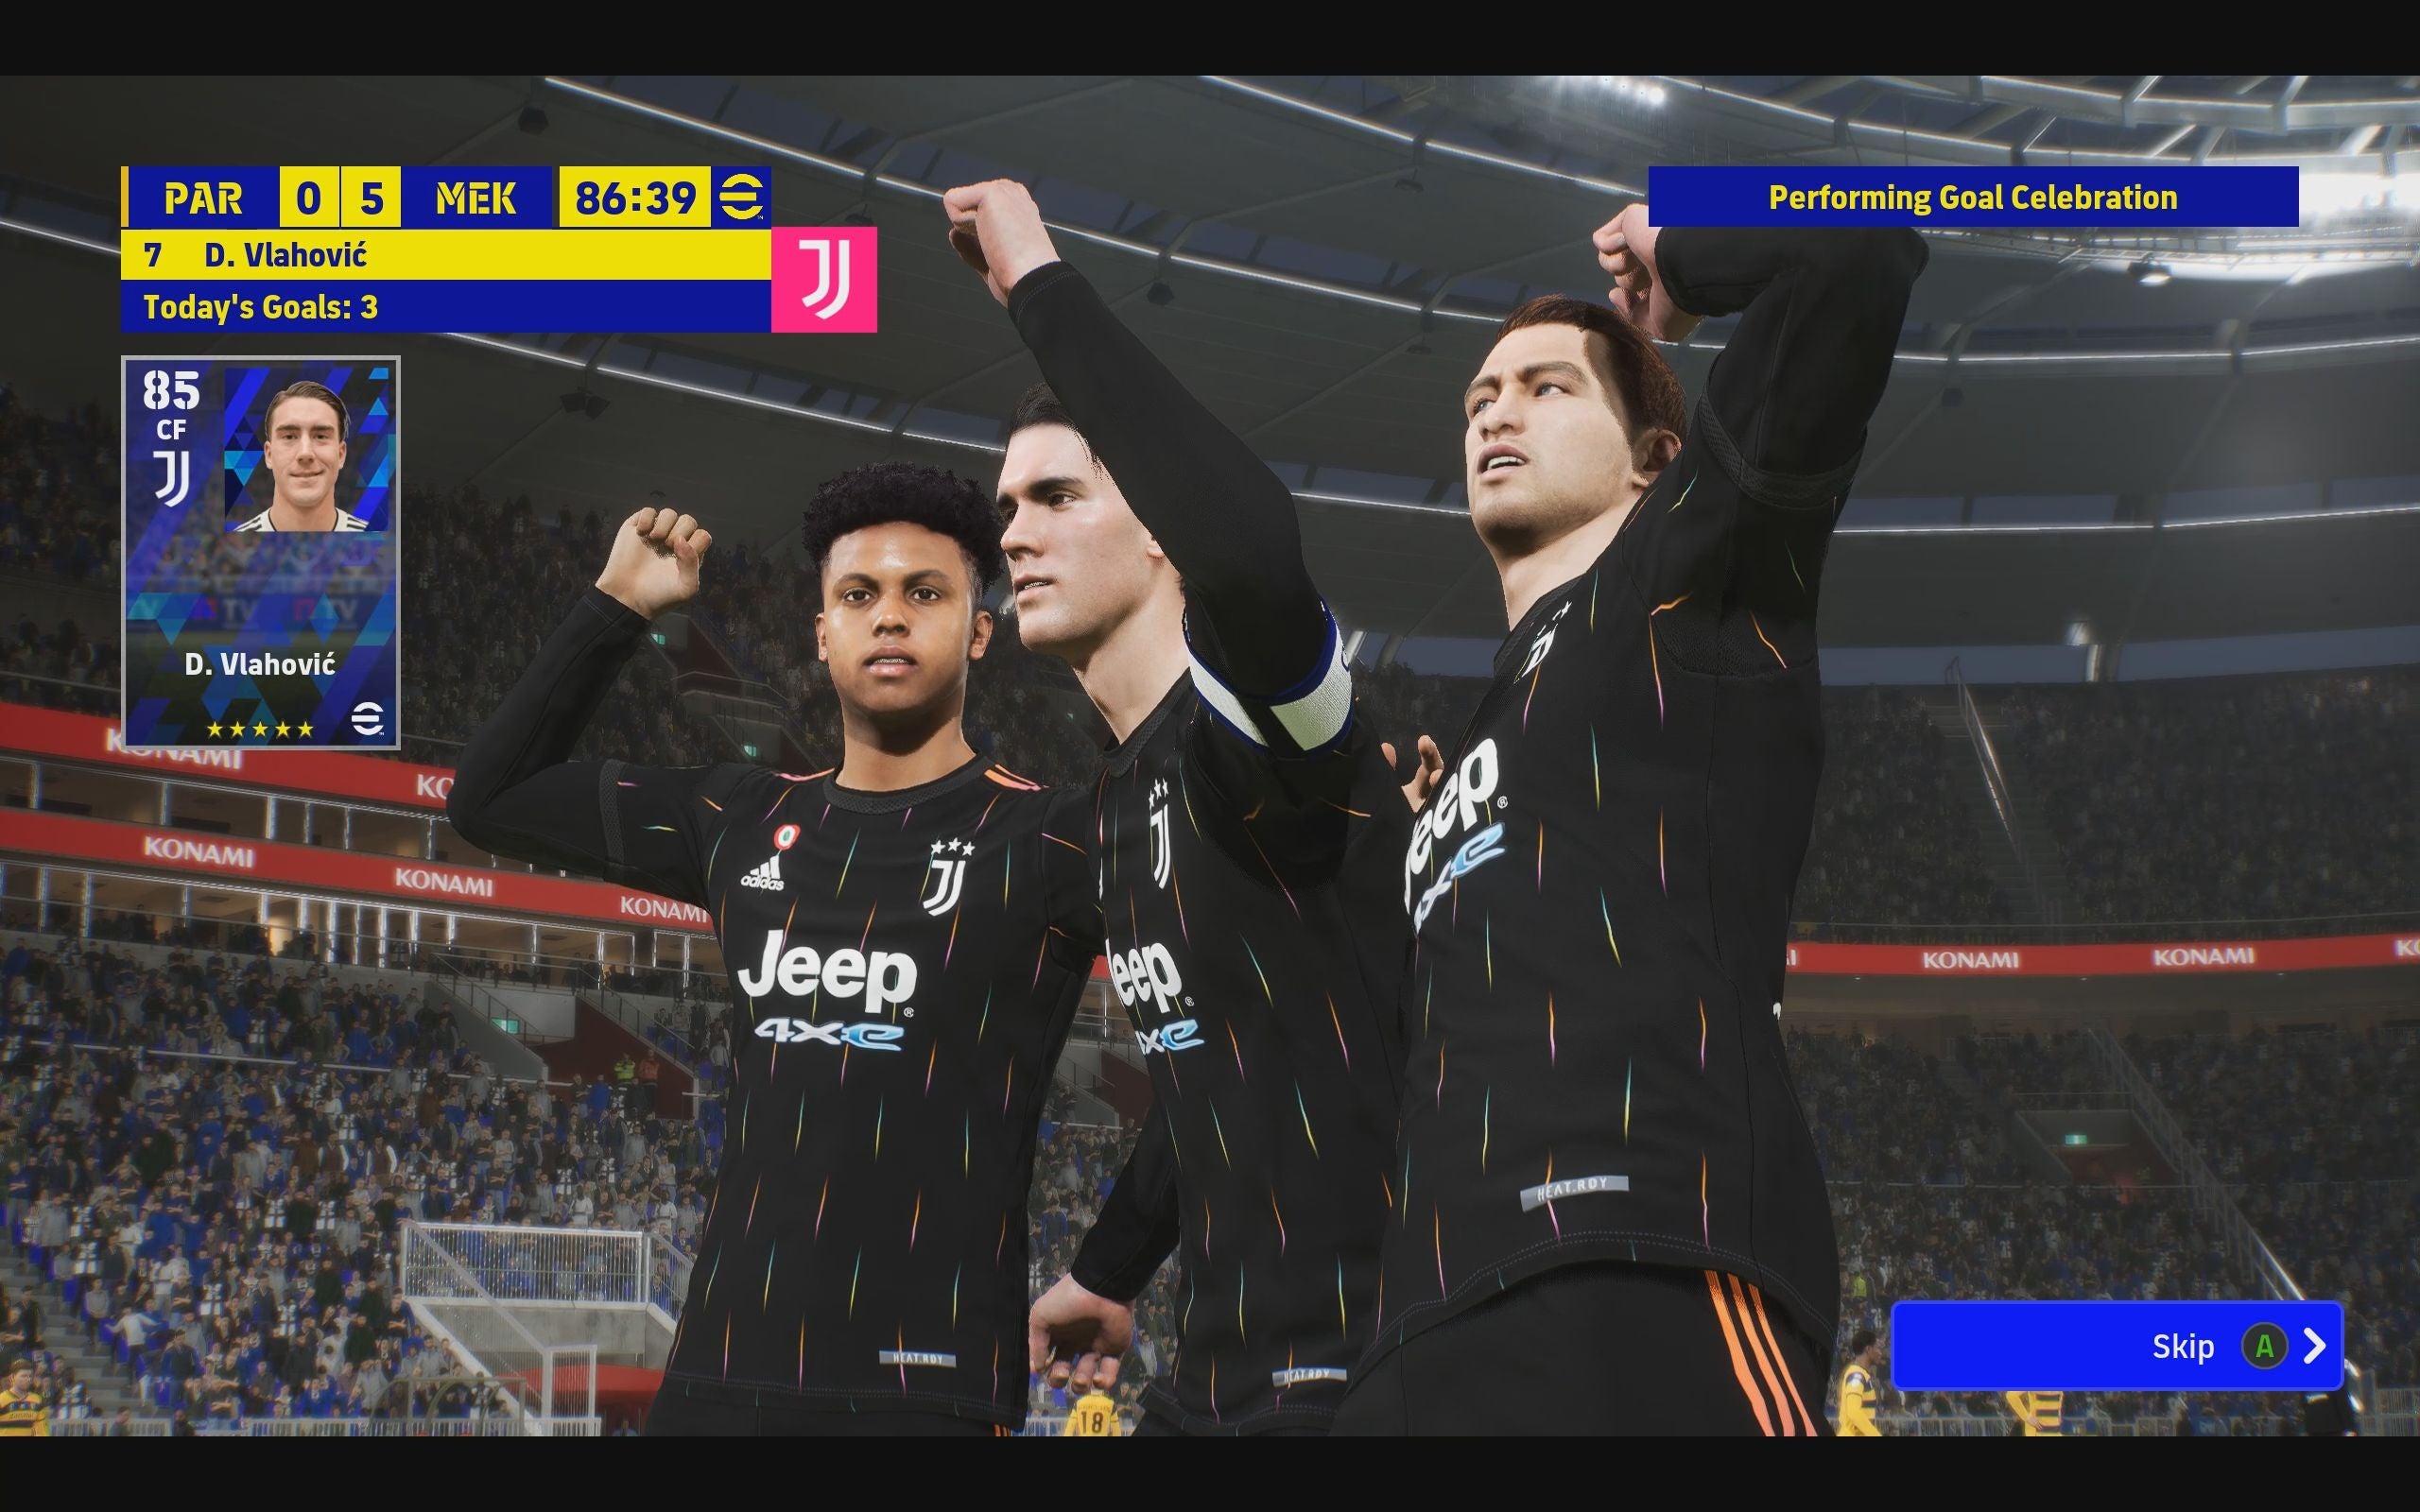 eFootball review: Three players in all-black Juventus kit celebrate Dusan Vlahovic's third goal of a 5-0 win in the 87th minute.